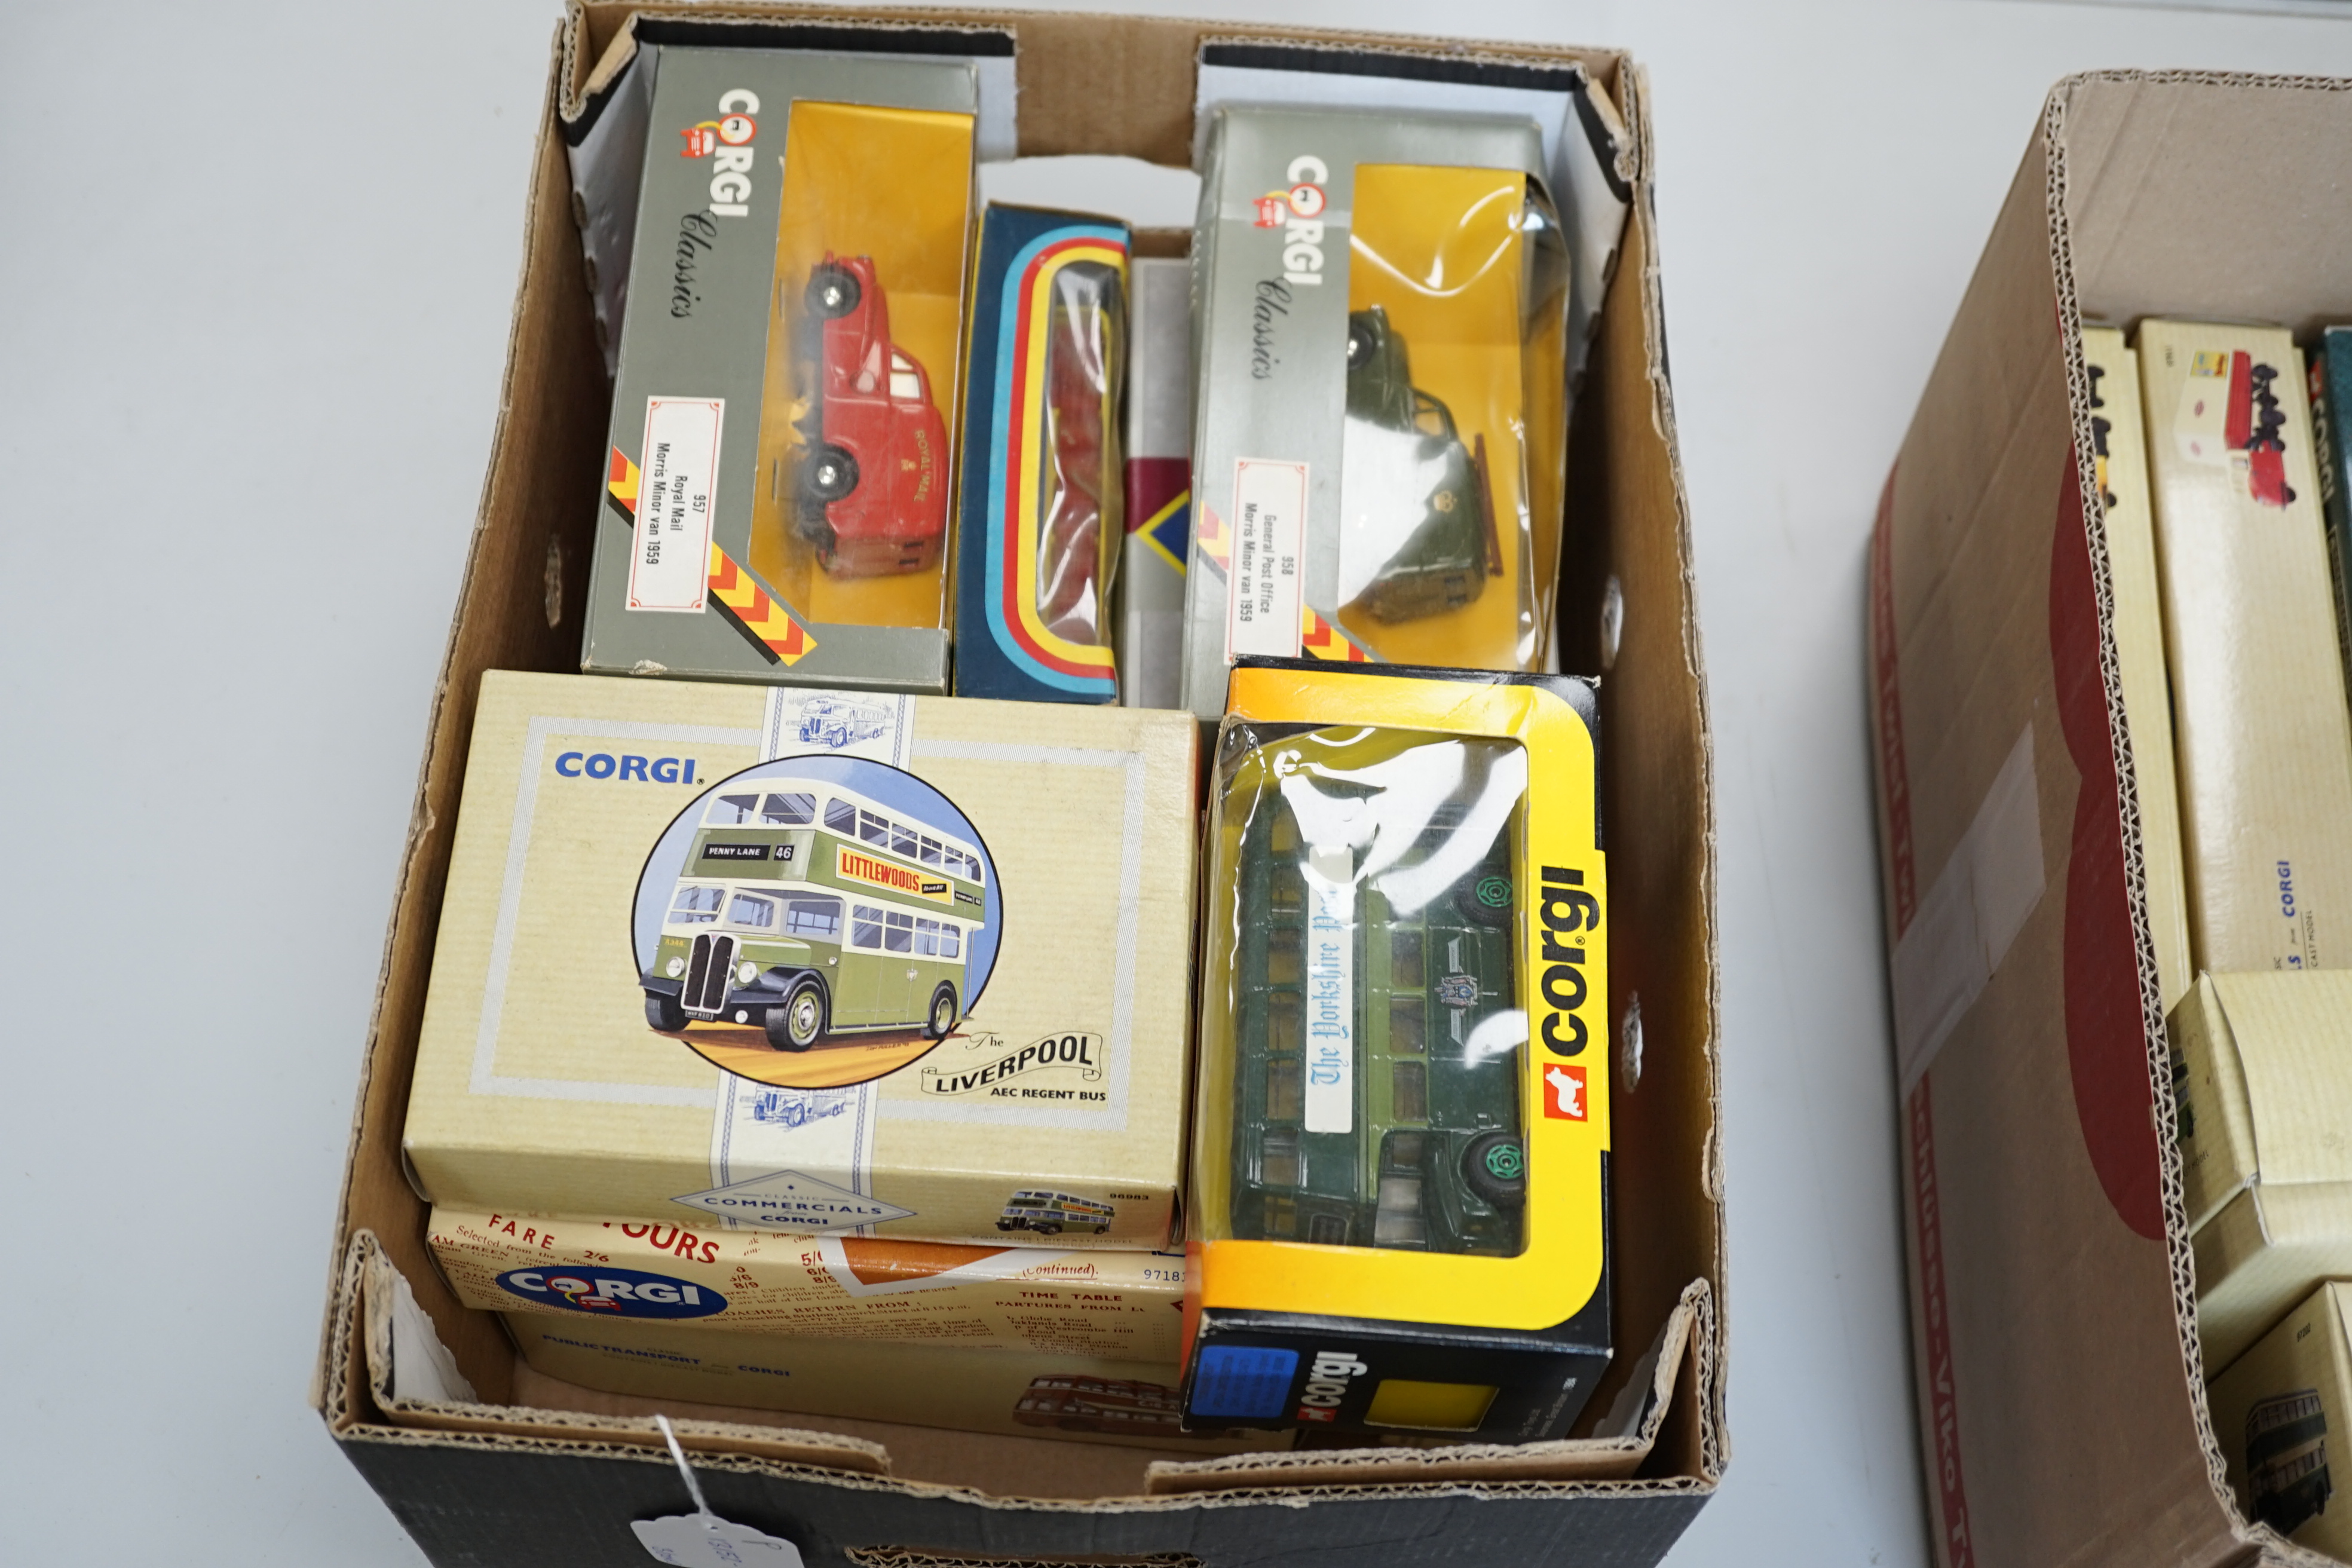 Thirty-three boxed Corgi Classics, etc. diecast buses, coaches and commercial vehicles, operators including; Timpsons, Liverpool, Post Office telephone van, Leeds City, Stagecoach, Maidstone & District, Southdown, etc.